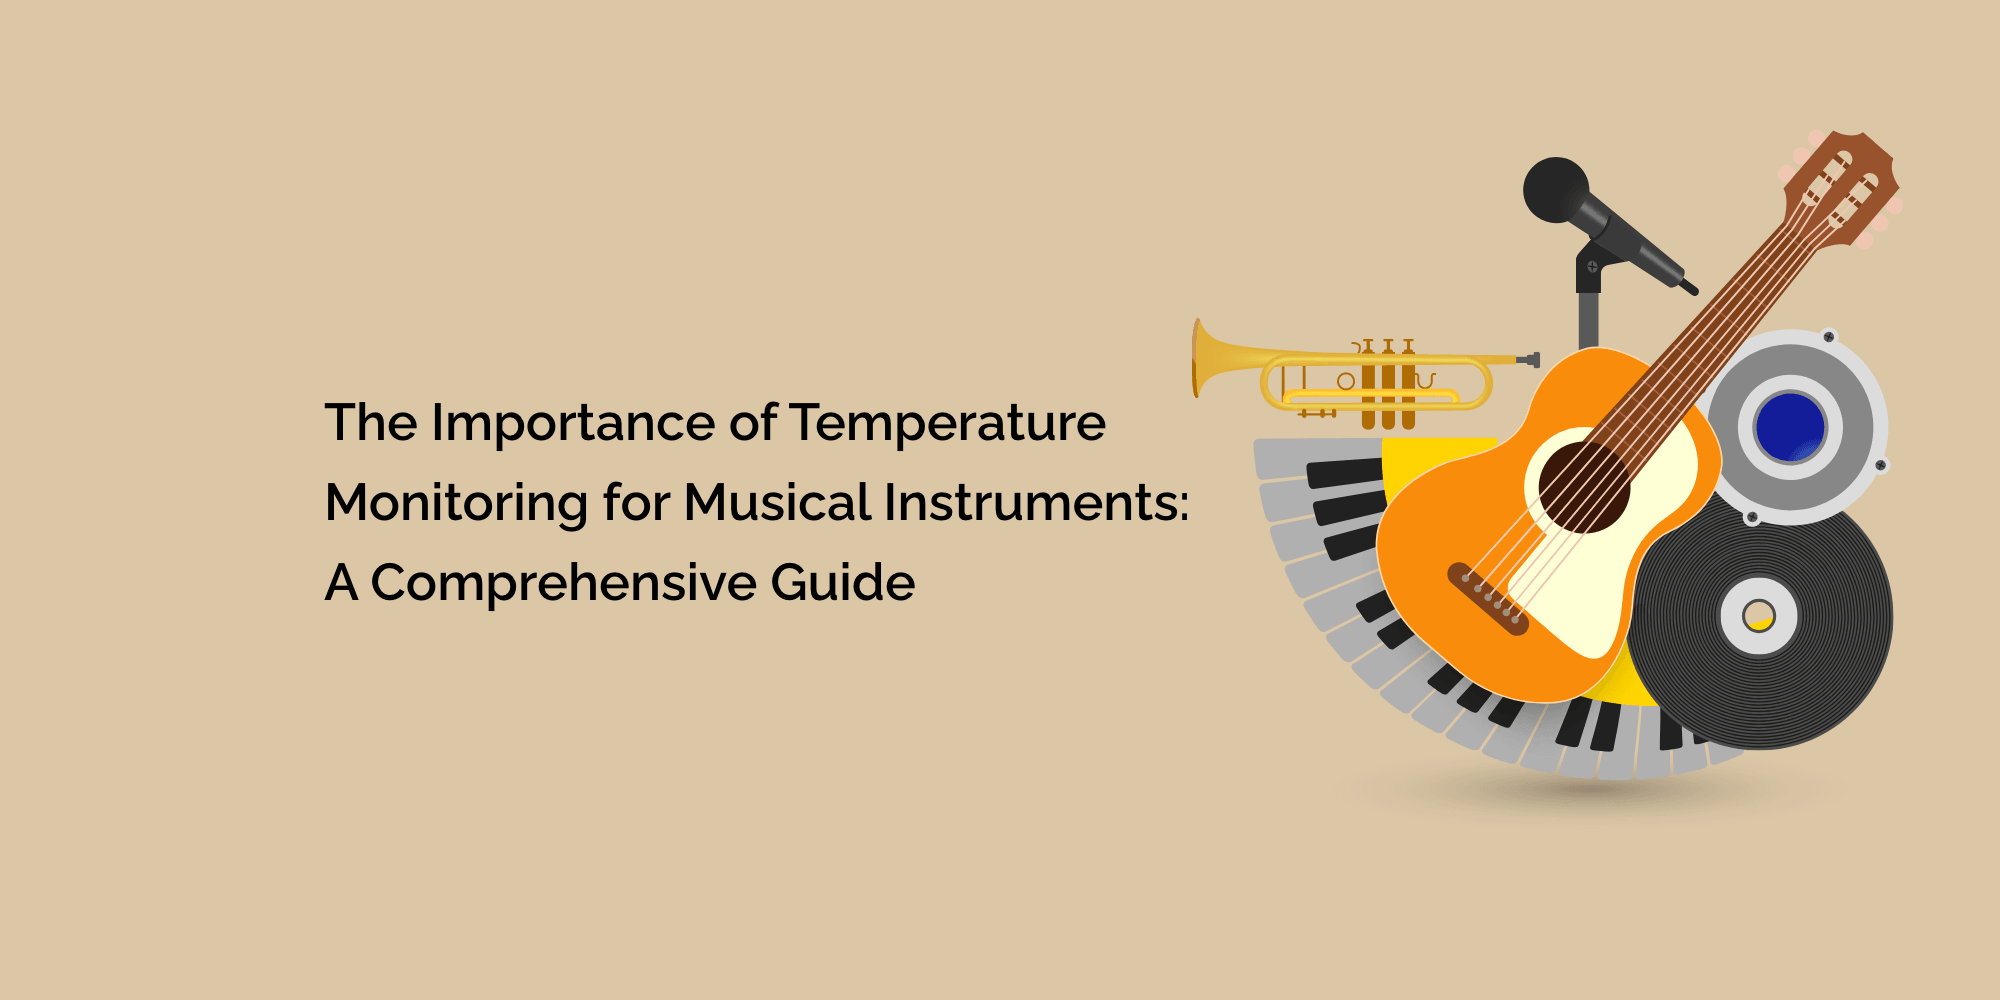 The Importance of Temperature Monitoring for Musical Instruments: A Comprehensive Guide